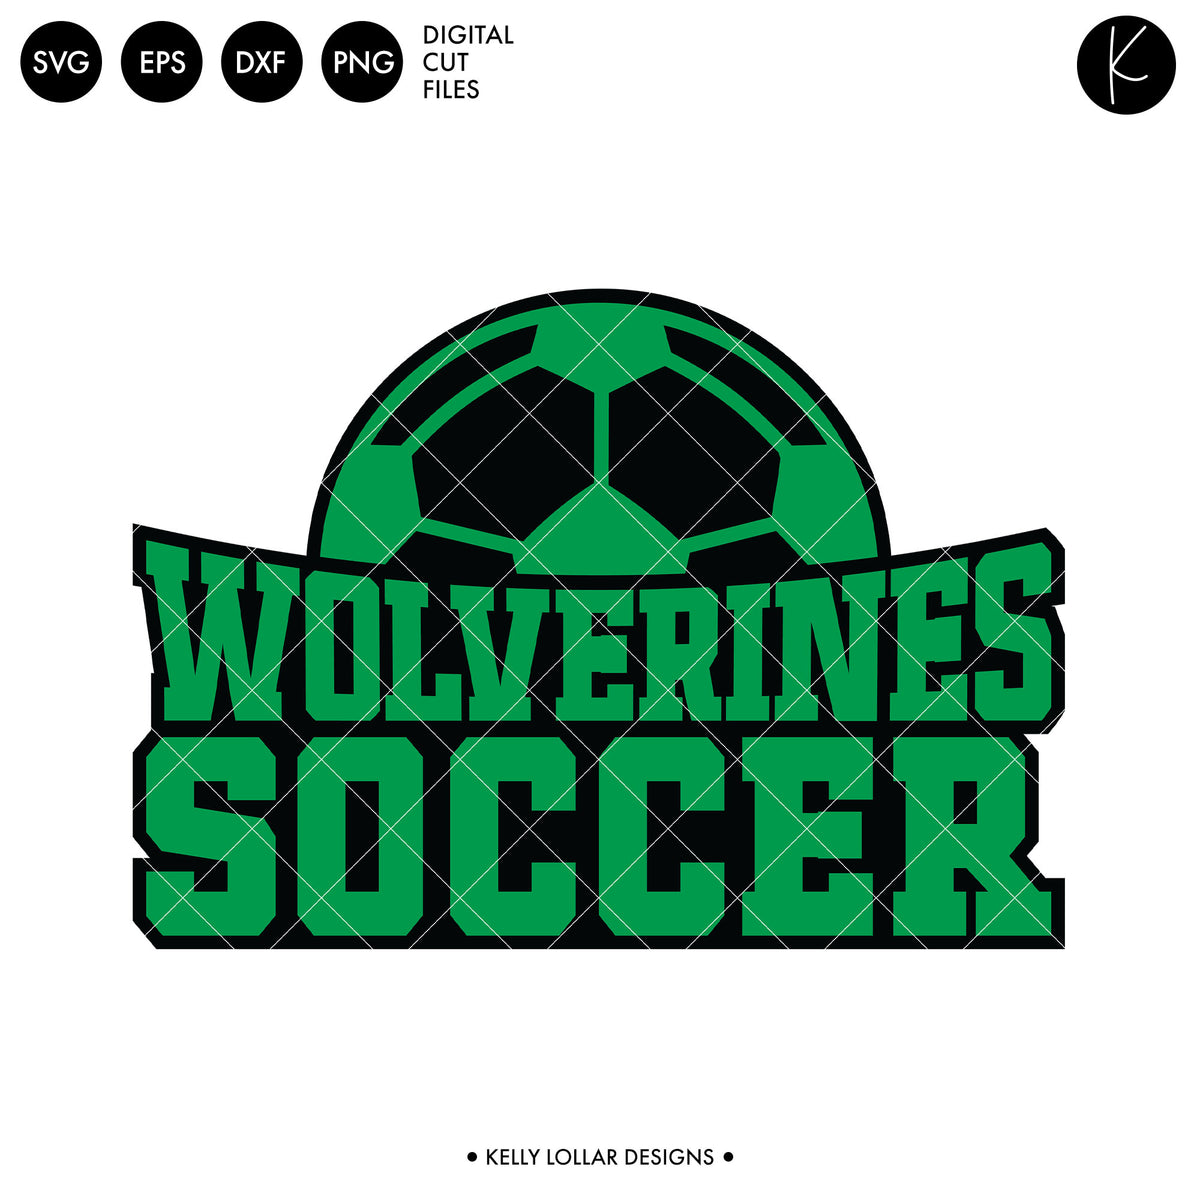 Wolverines Soccer and Football Bundle | SVG DXF EPS PNG Cut Files